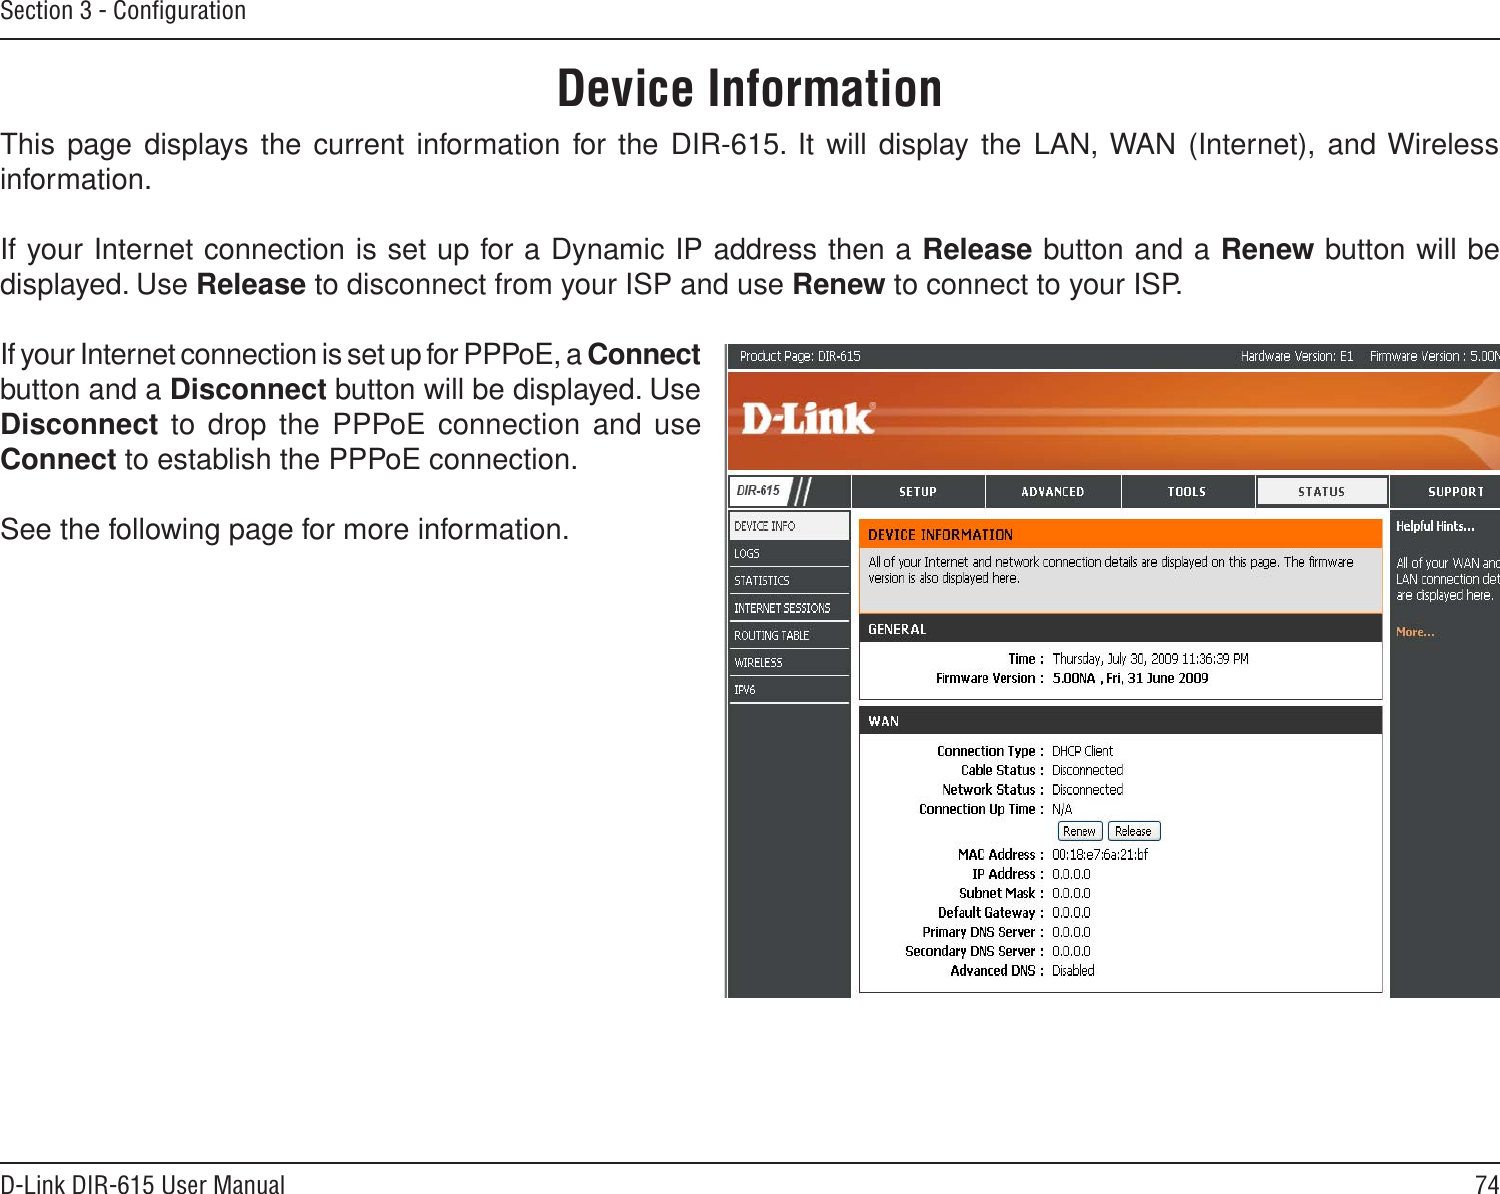 74D-Link DIR-615 User ManualSection 3 - ConﬁgurationThis page displays the current information for  the DIR-615. It will display the LAN, WAN (Internet), and Wireless information.If your Internet connection is set up for a Dynamic IP address then a Release button and a Renew button will be displayed. Use Release to disconnect from your ISP and use Renew to connect to your ISP. If your Internet connection is set up for PPPoE, a Connect button and a Disconnect button will be displayed. Use Disconnect to  drop the PPPoE connection and use Connect to establish the PPPoE connection.See the following page for more information.Device Information